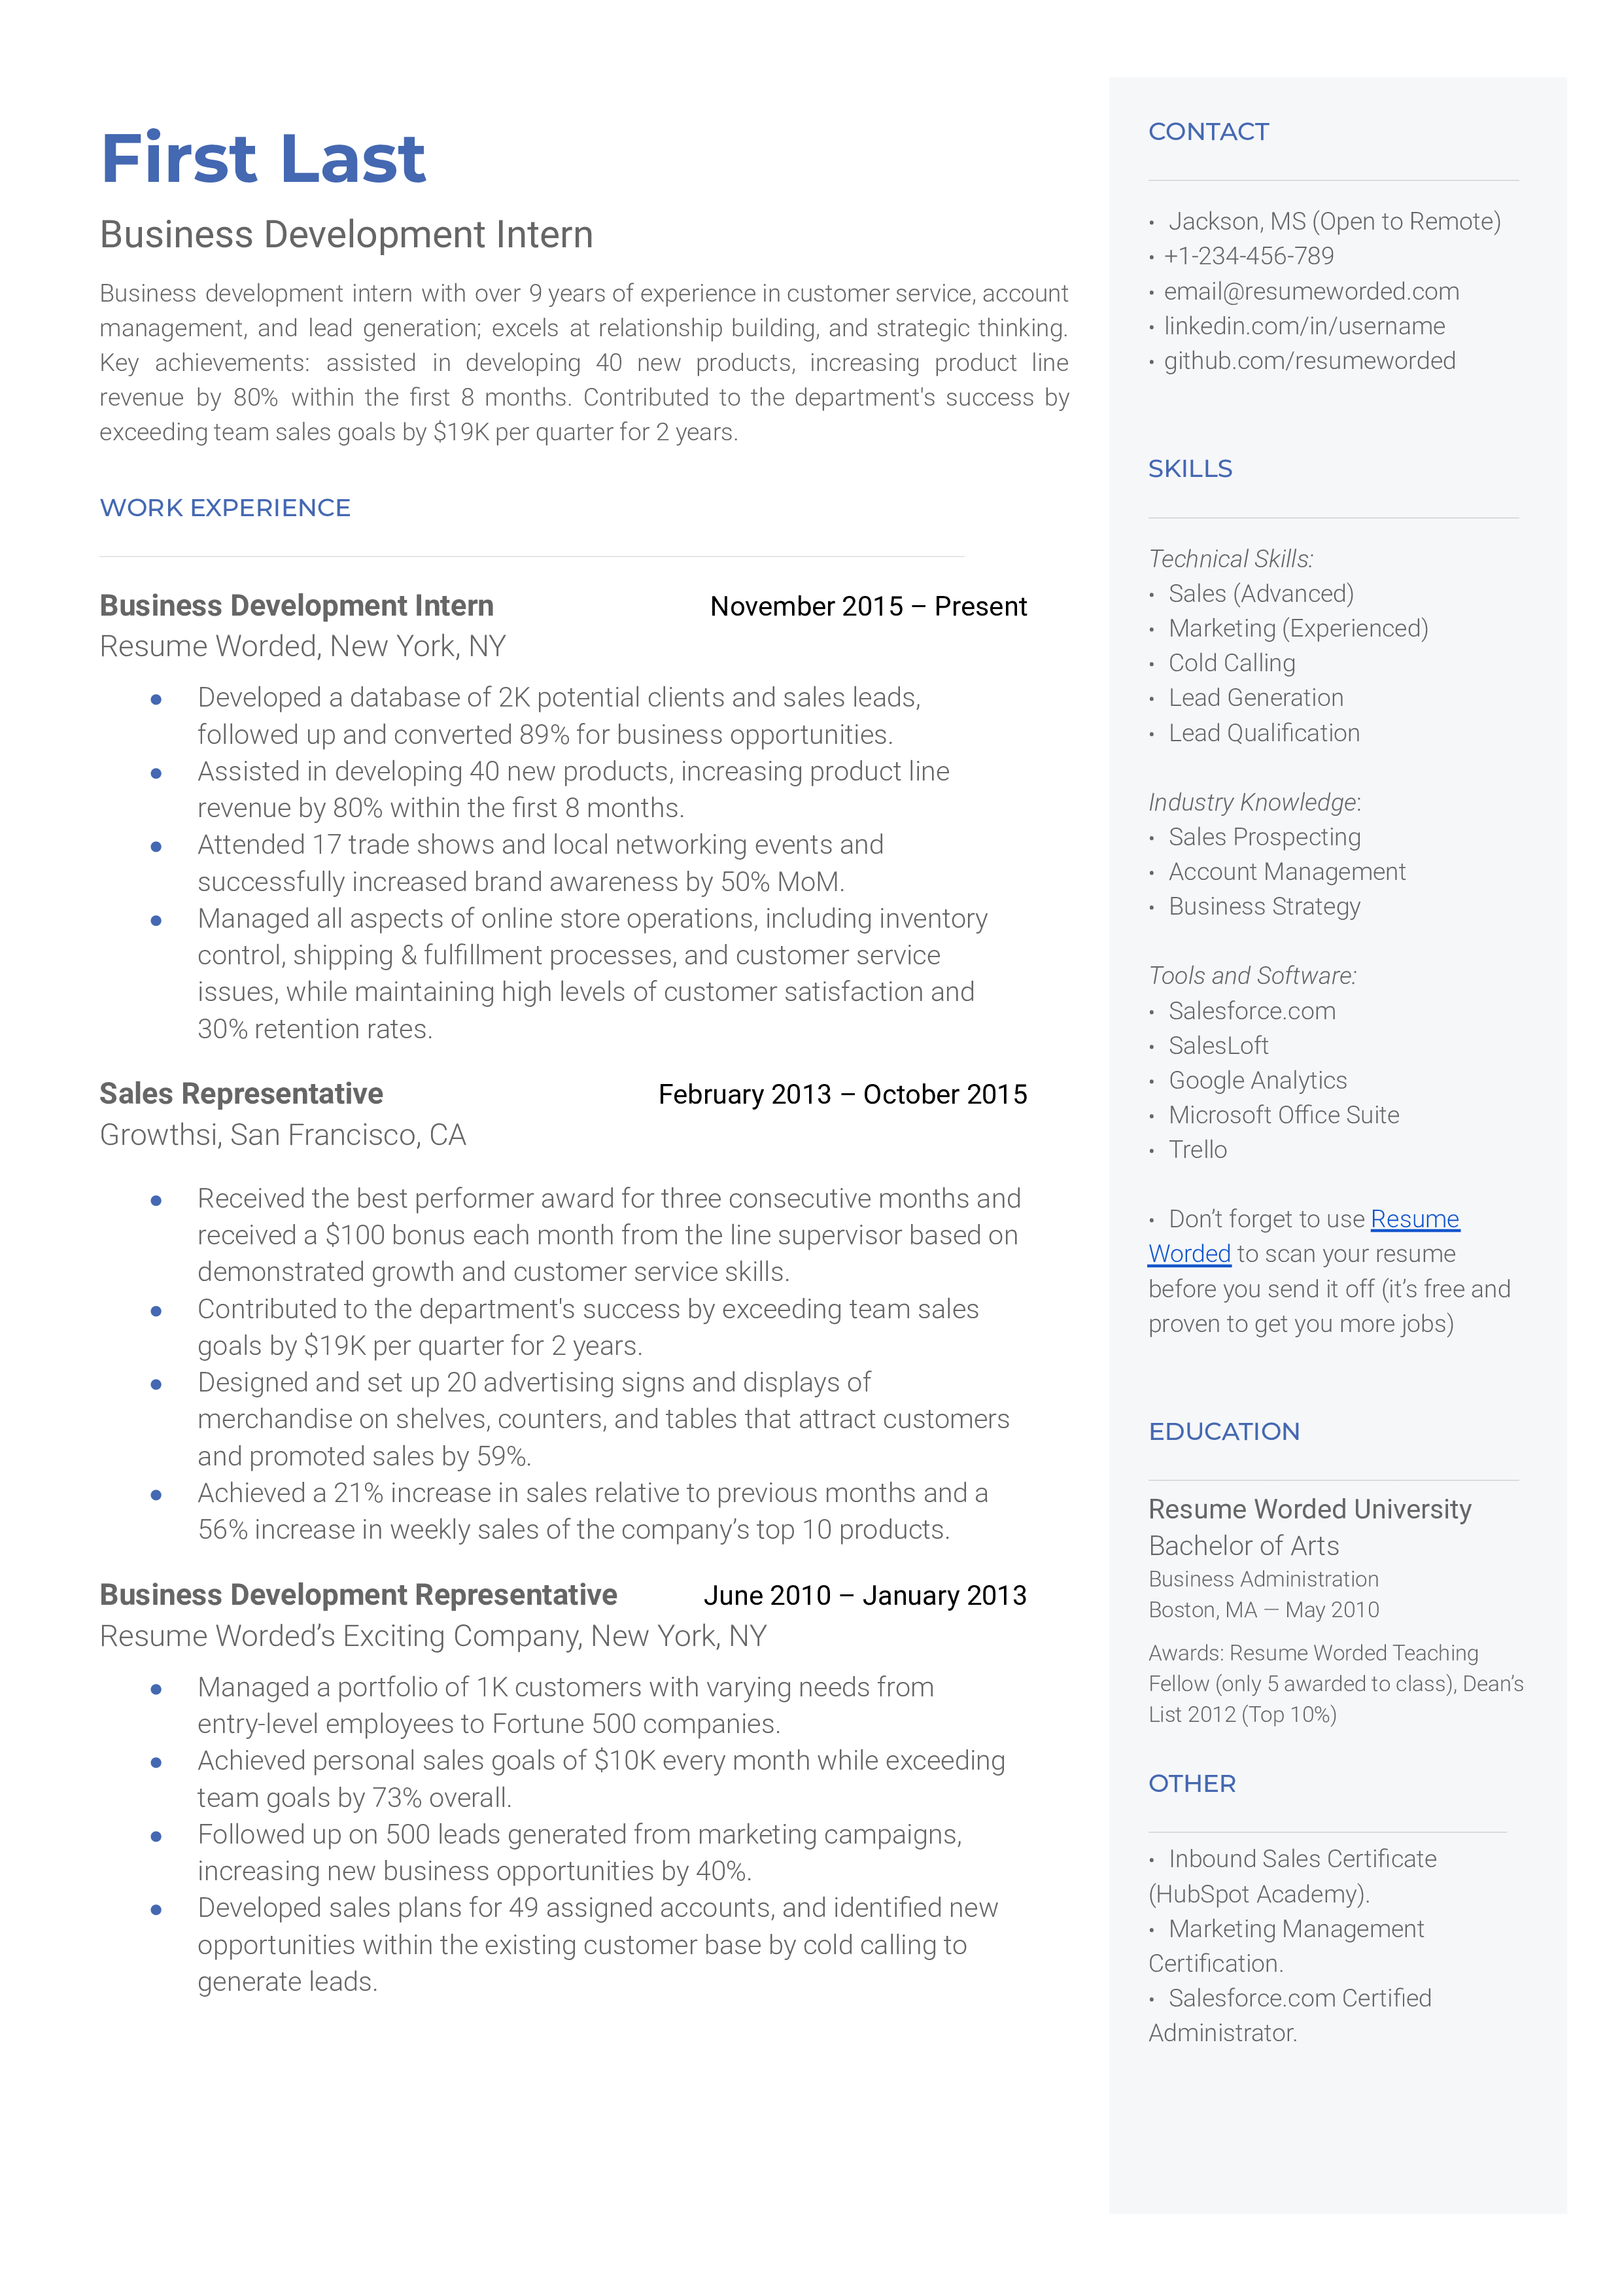 A business development intern resume sample that highlights the applicant’s relevant certifications and related experience.